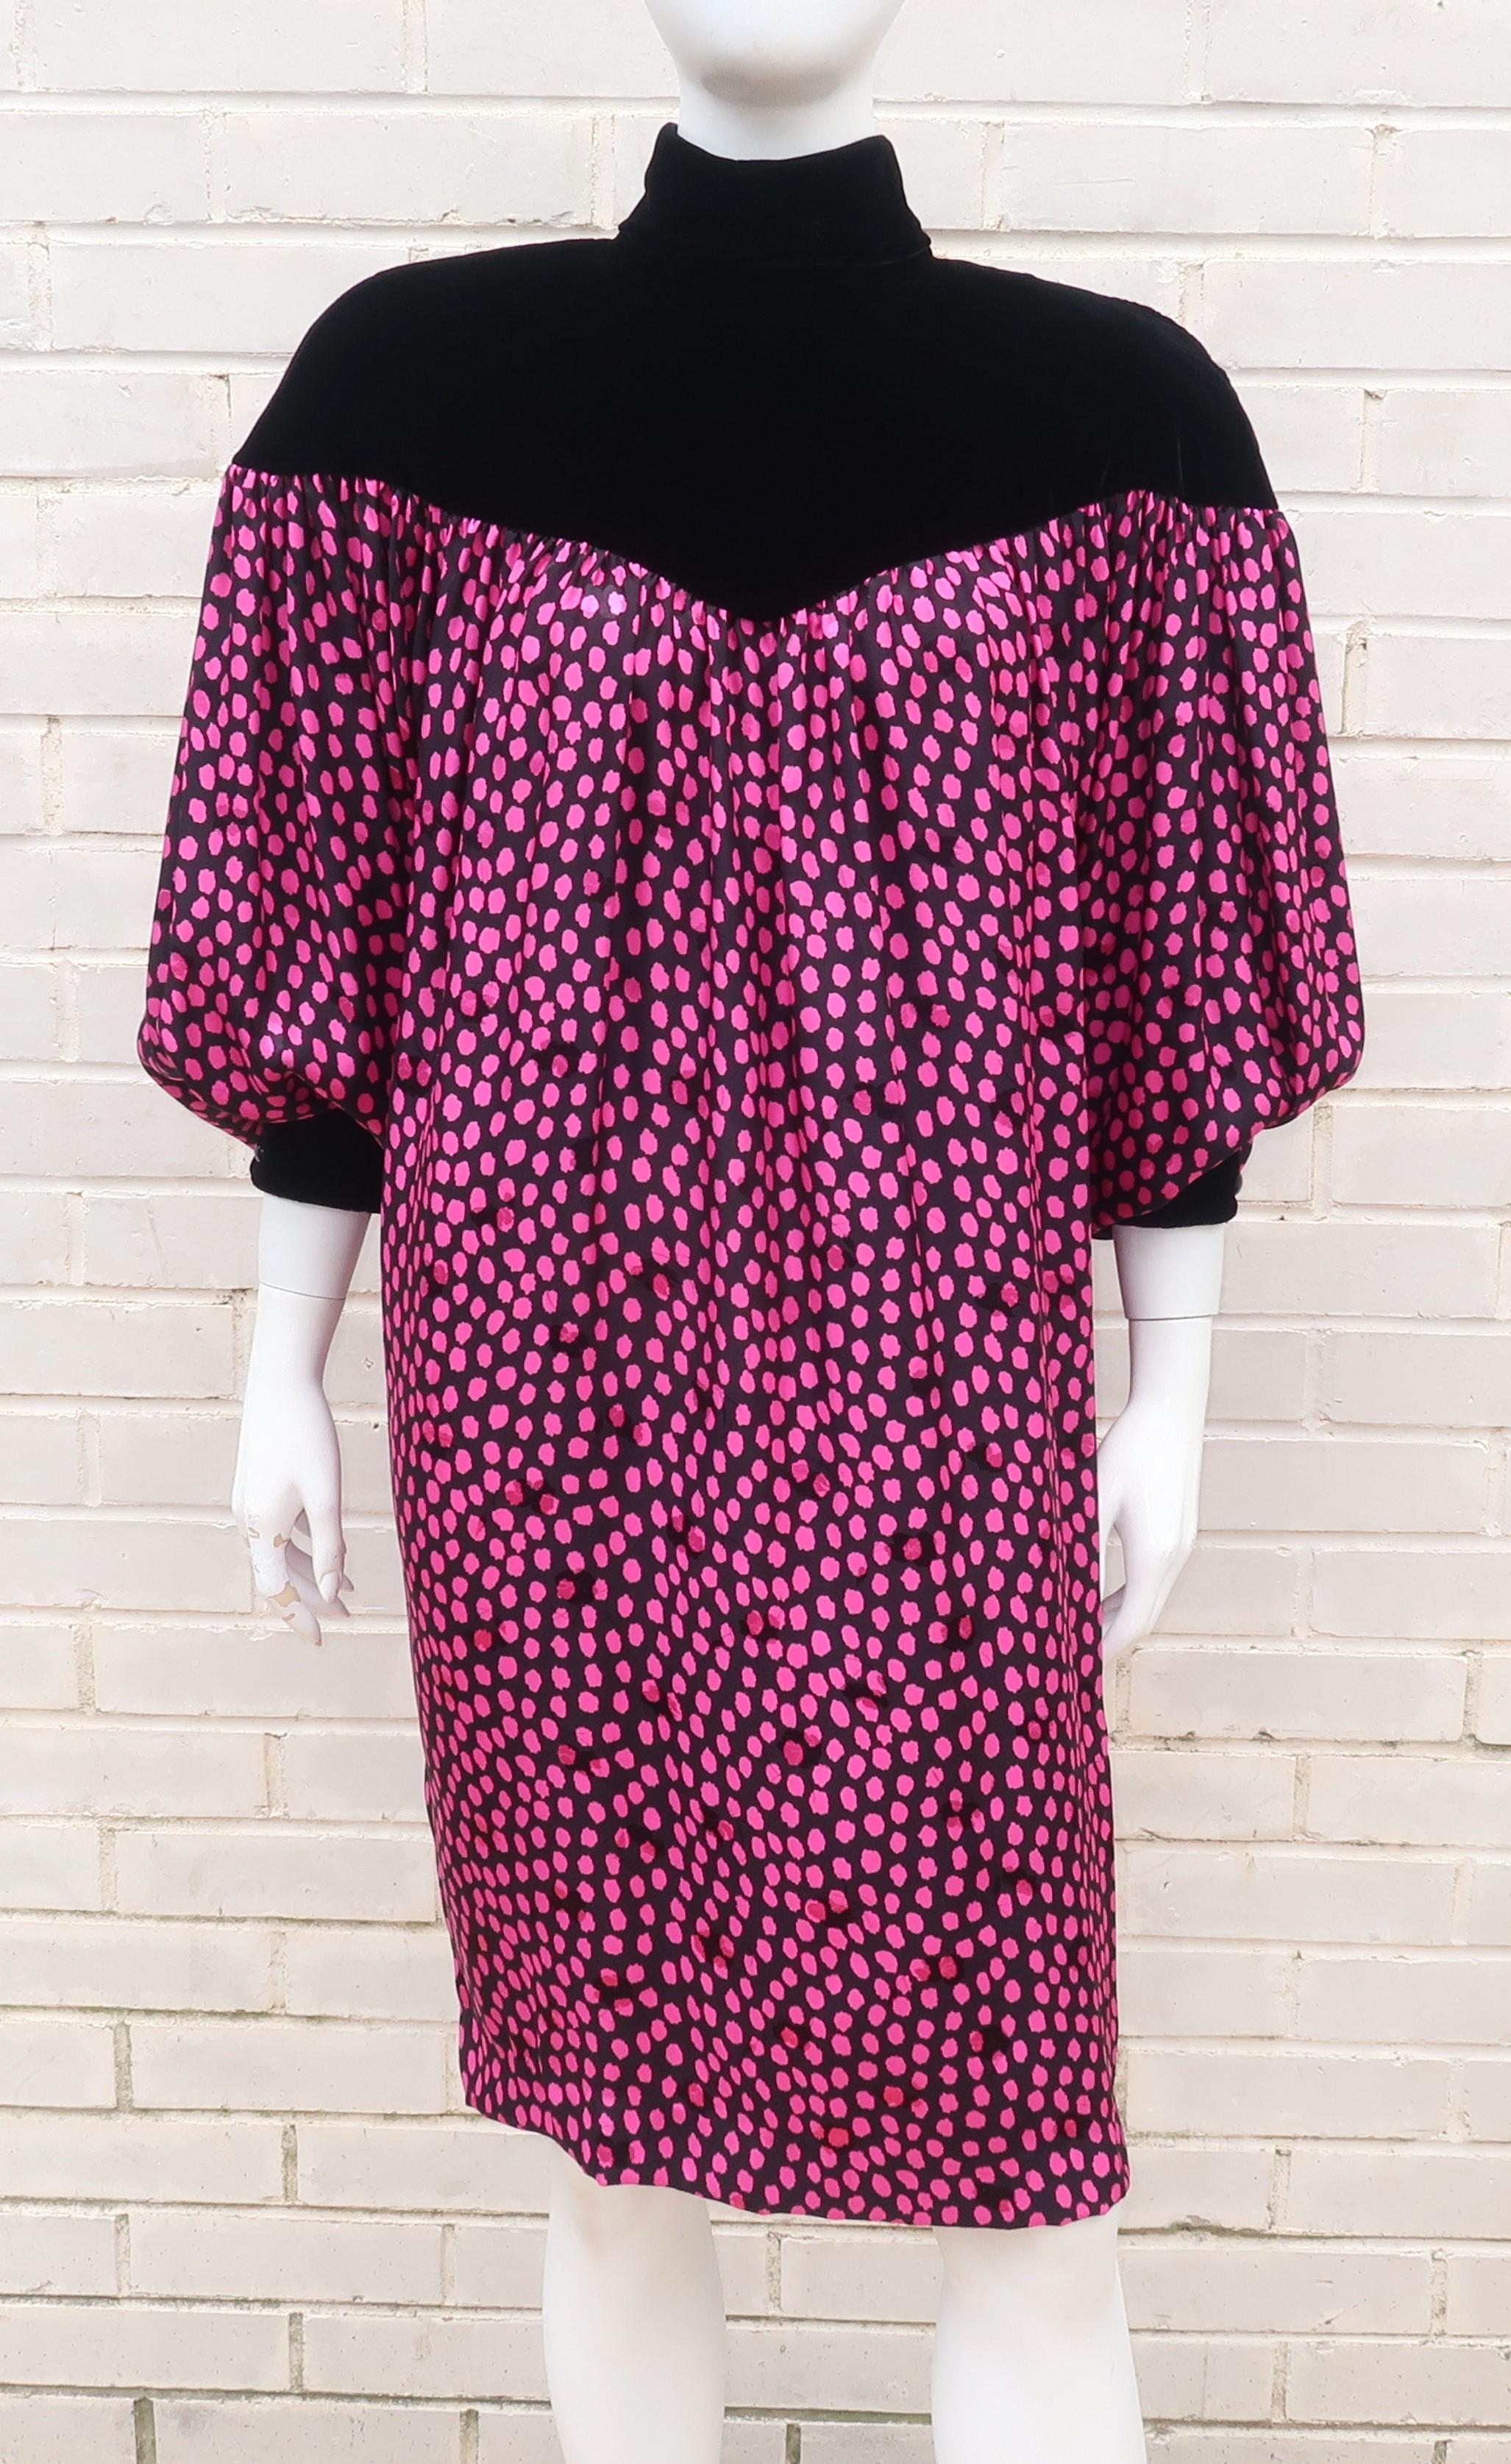 A 1980's period perfect silk jacquard dress by Rickie Freeman for Teri Jon including big shoulder pads, a voluminous silhouette and tapering hemline.  The body of the dress features a black silk fabric accented by abstract magenta polka dots and a